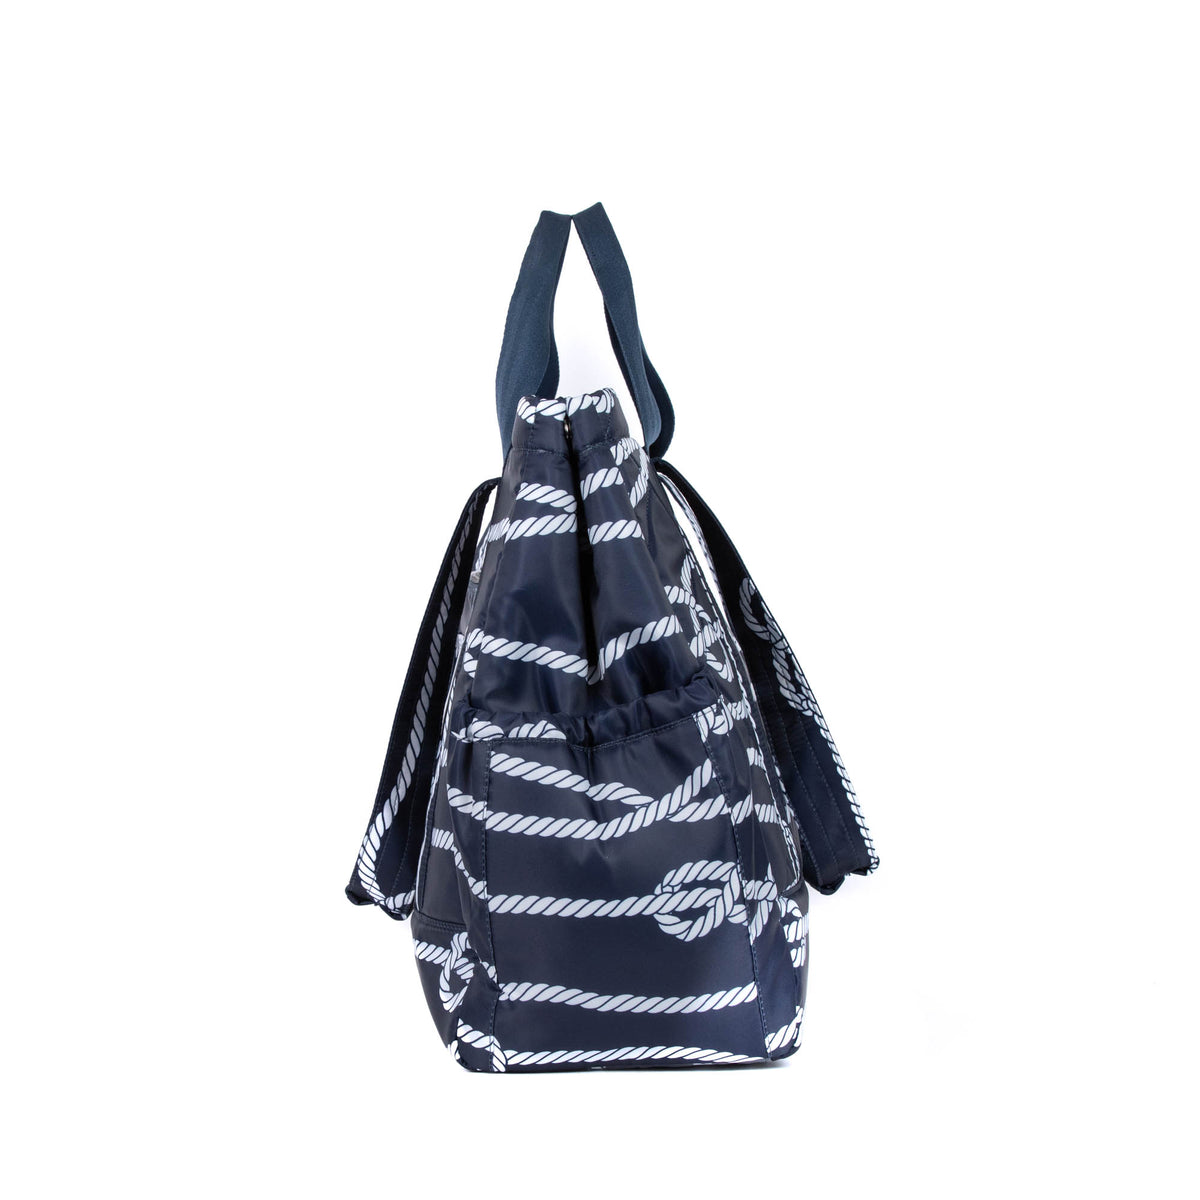 Yacht Carry-All Tote